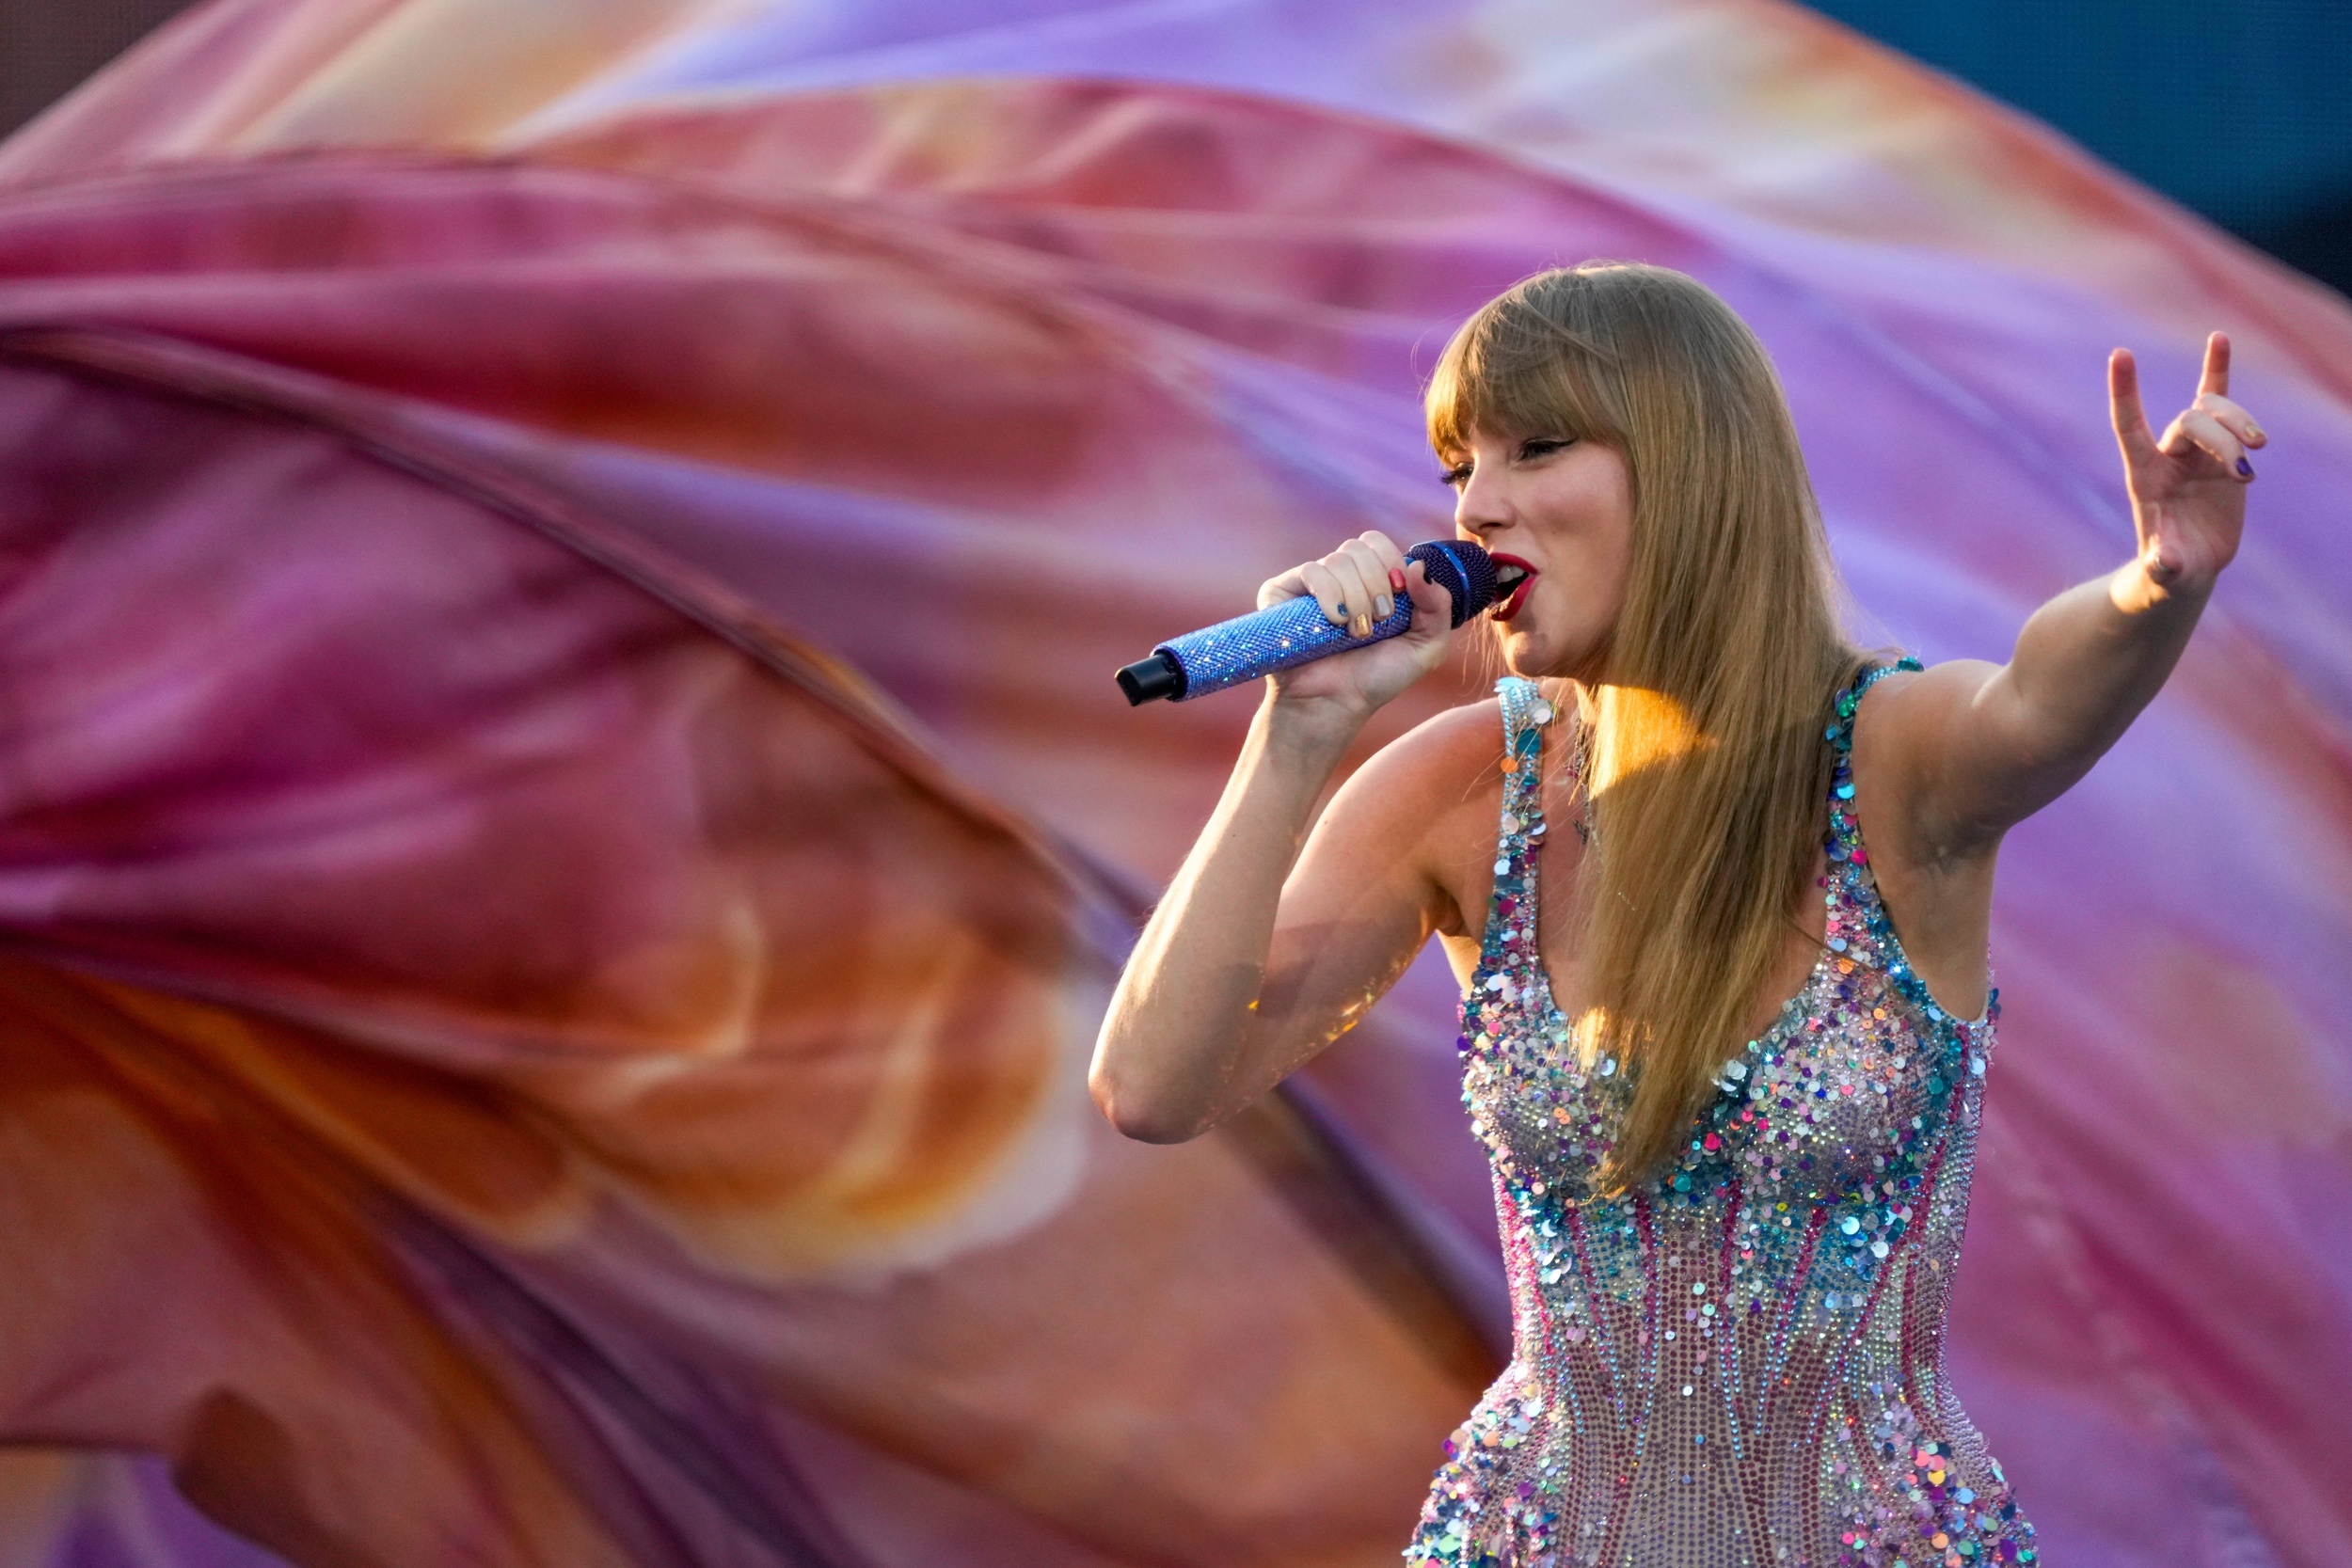 <p>Yes, it's still not done. In 2023, Swift became the first artist to put on a tour that surpassed $1 billion in revenue. And, that was just one portion of "The Eras Tour," which is sure to be the hottest international concert ticket in 2024, as well. This year's run begins in Japan on Feb. 7, then heads to Australia and Europe before returning to America in mid-October for stops in Miami, New Orleans and Indianapolis. Now, for those who didn't score tickets and aren't willing to pay to ridiculous prices on the secondary market, then there's always <a href="https://www.taylorswift.com/tour-us/"><em>T</em><em>he Eras Tour Concert Film</em></a> to fall back on. </p><p><a href='https://www.msn.com/en-us/community/channel/vid-cj9pqbr0vn9in2b6ddcd8sfgpfq6x6utp44fssrv6mc2gtybw0us'>Did you enjoy this slideshow? Follow us on MSN to see more of our exclusive entertainment content.</a></p>